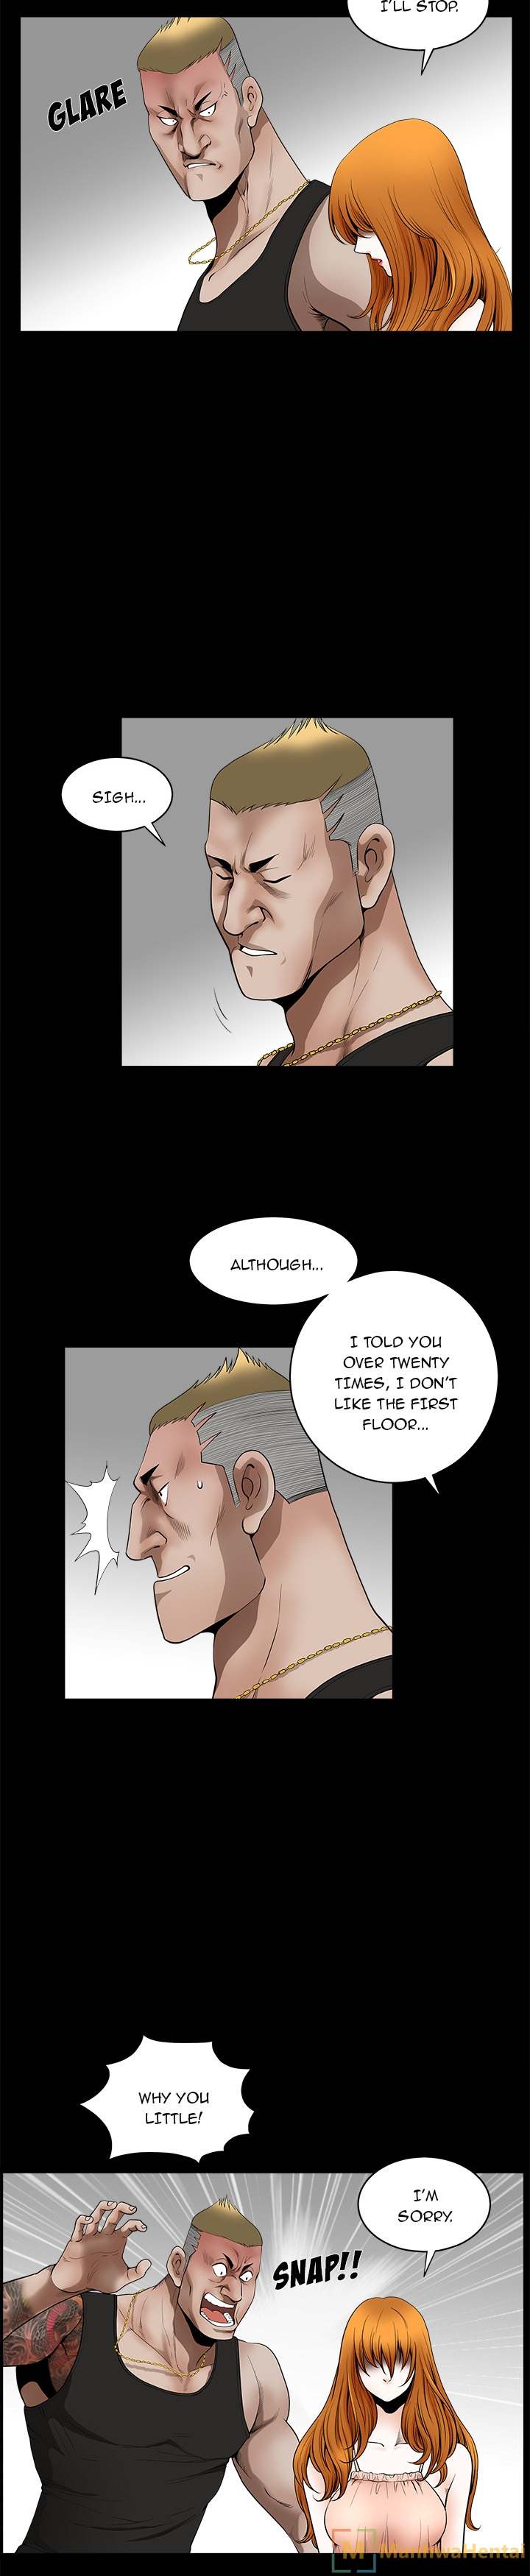 Neighbors - Chapter 1 Page 8